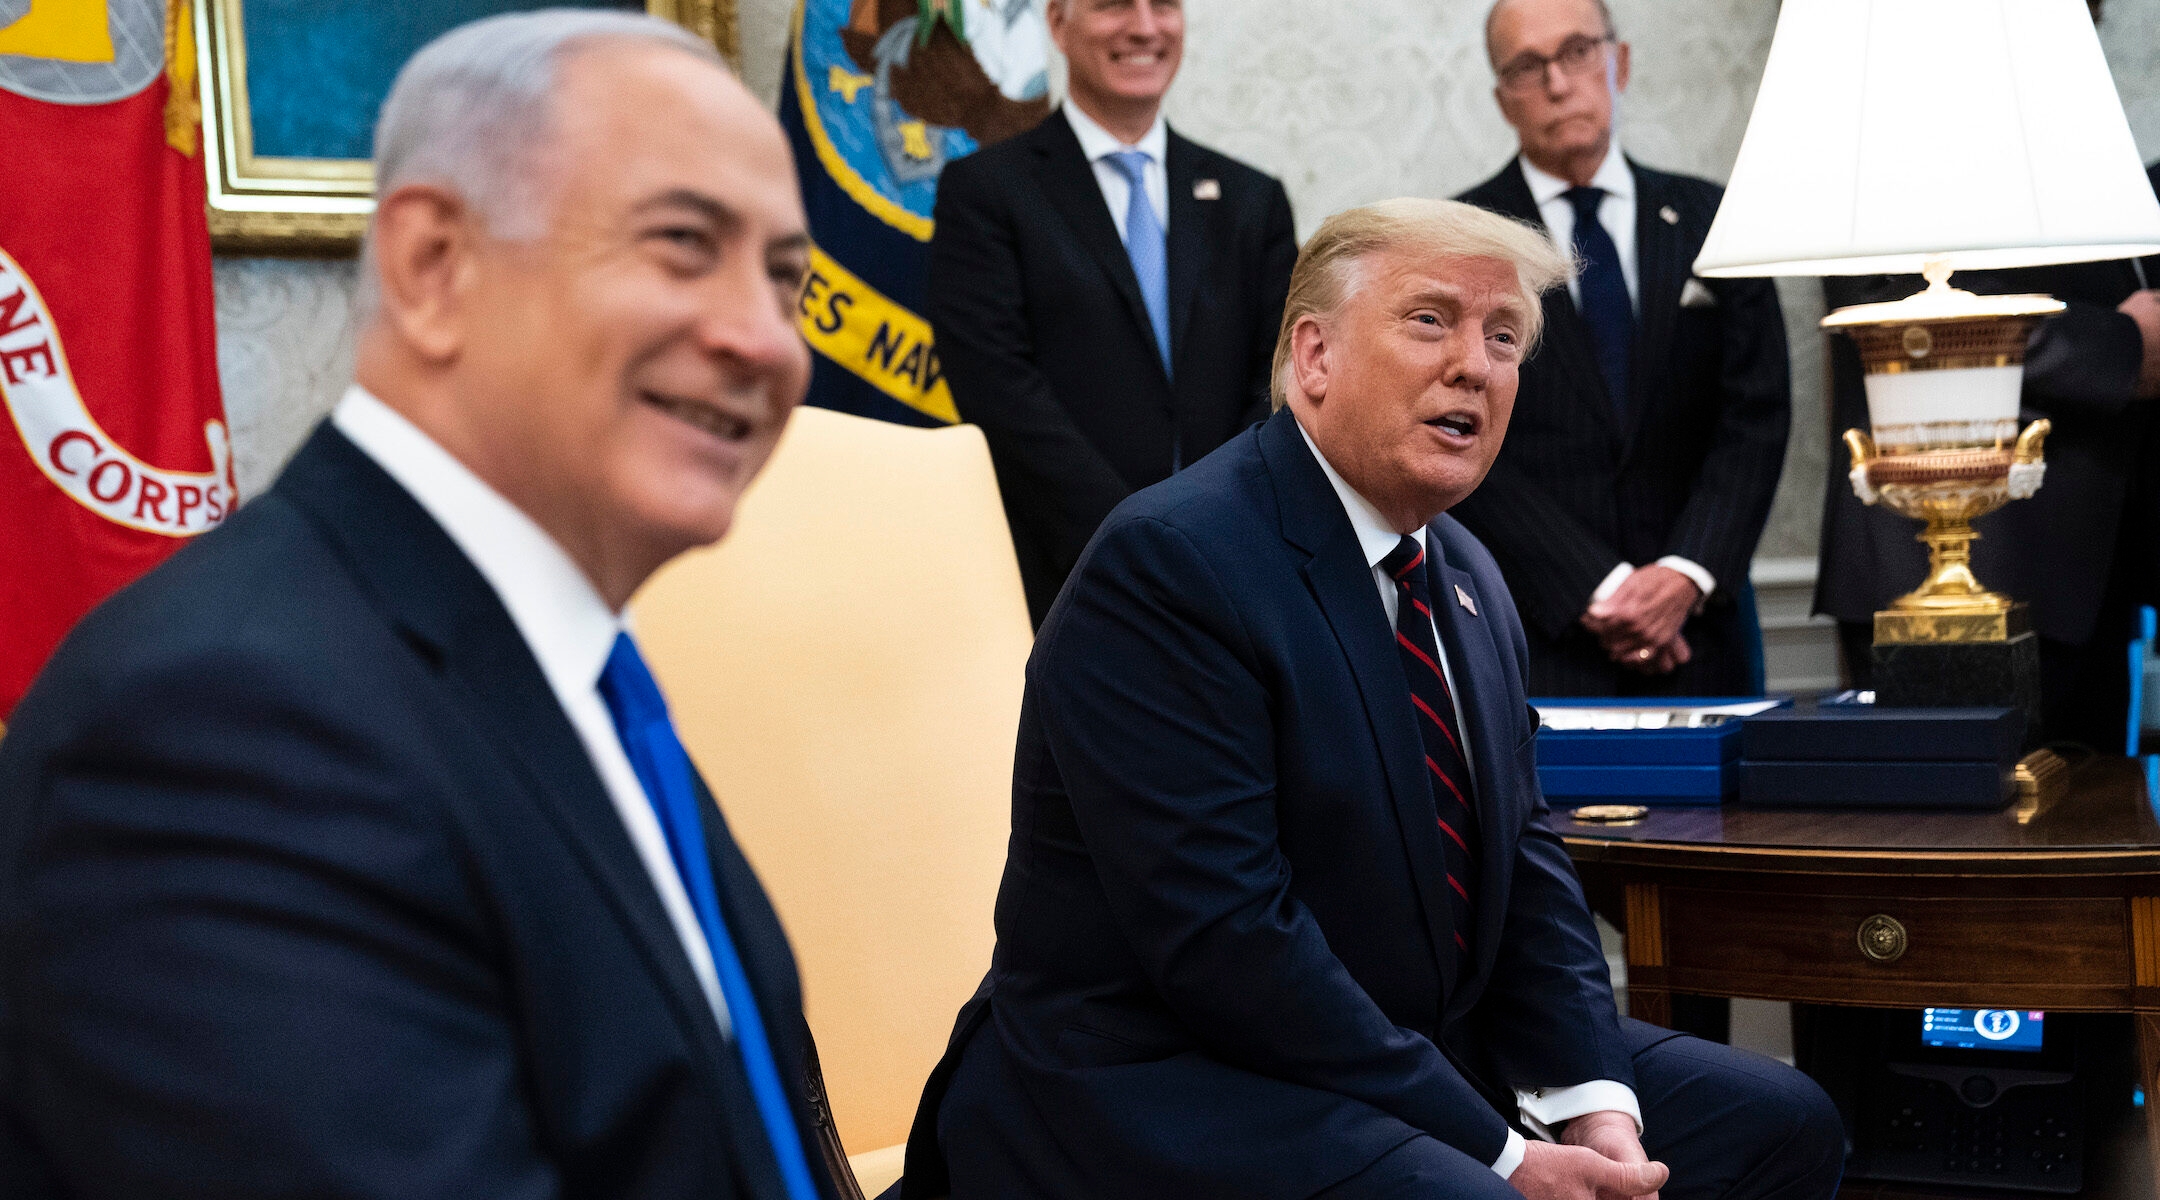 President Donald Trump and Israeli Prime Minister Benjamin Netanyahu participate in a meeting in the Oval Office on September 15, 2020, on the occasion of signing normalization agreements with the United Arab Emirates and Bahrain. (Doug Mills/Pool/Getty Images)